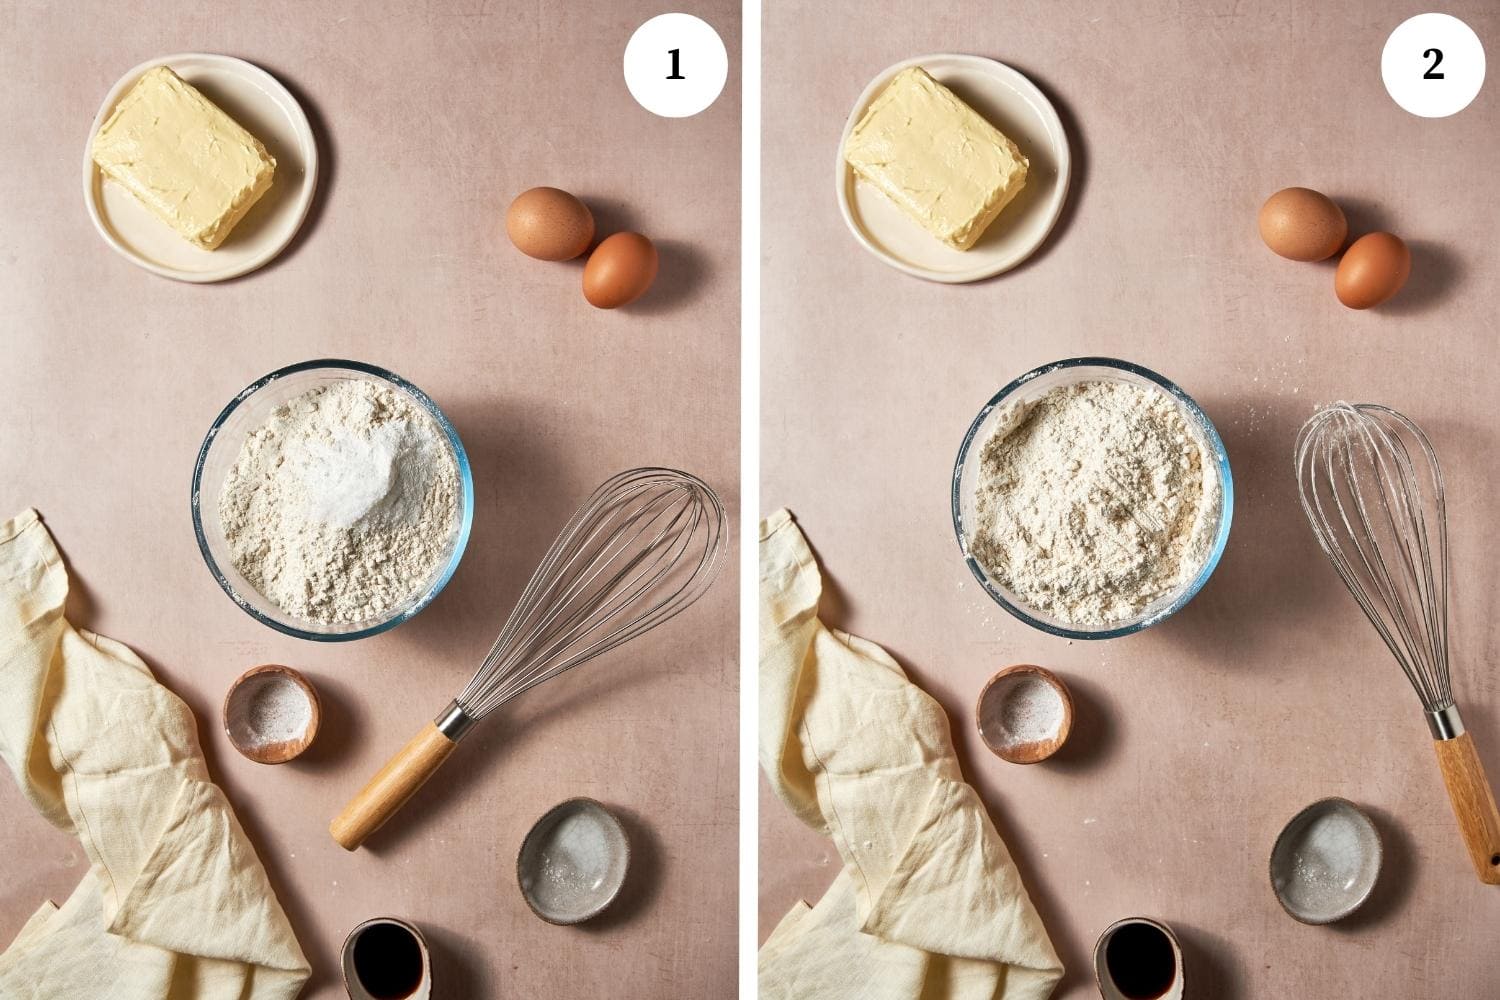 Ricotta cookies procedure: flour, baking powder and salt are placed in a bowl and mixed together,